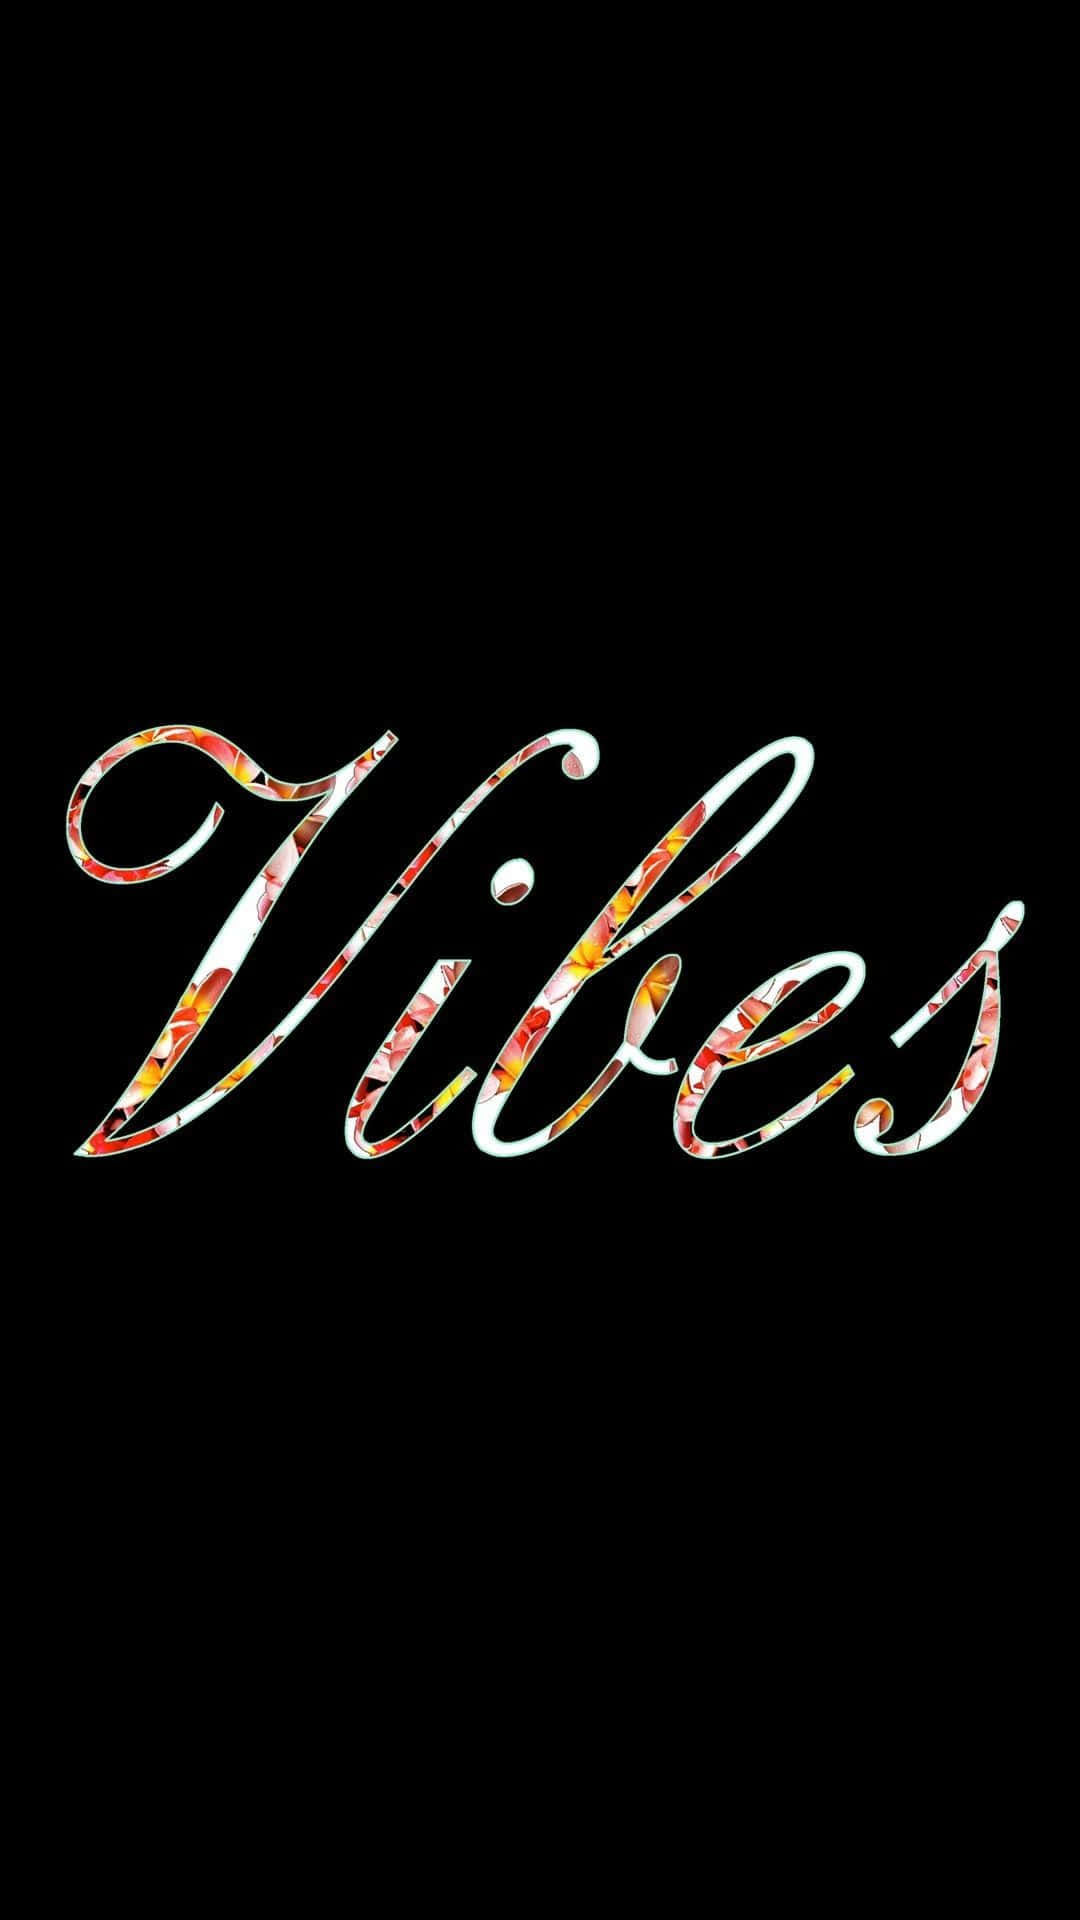 Vibes - A Black Background With The Word Vibes Written On It